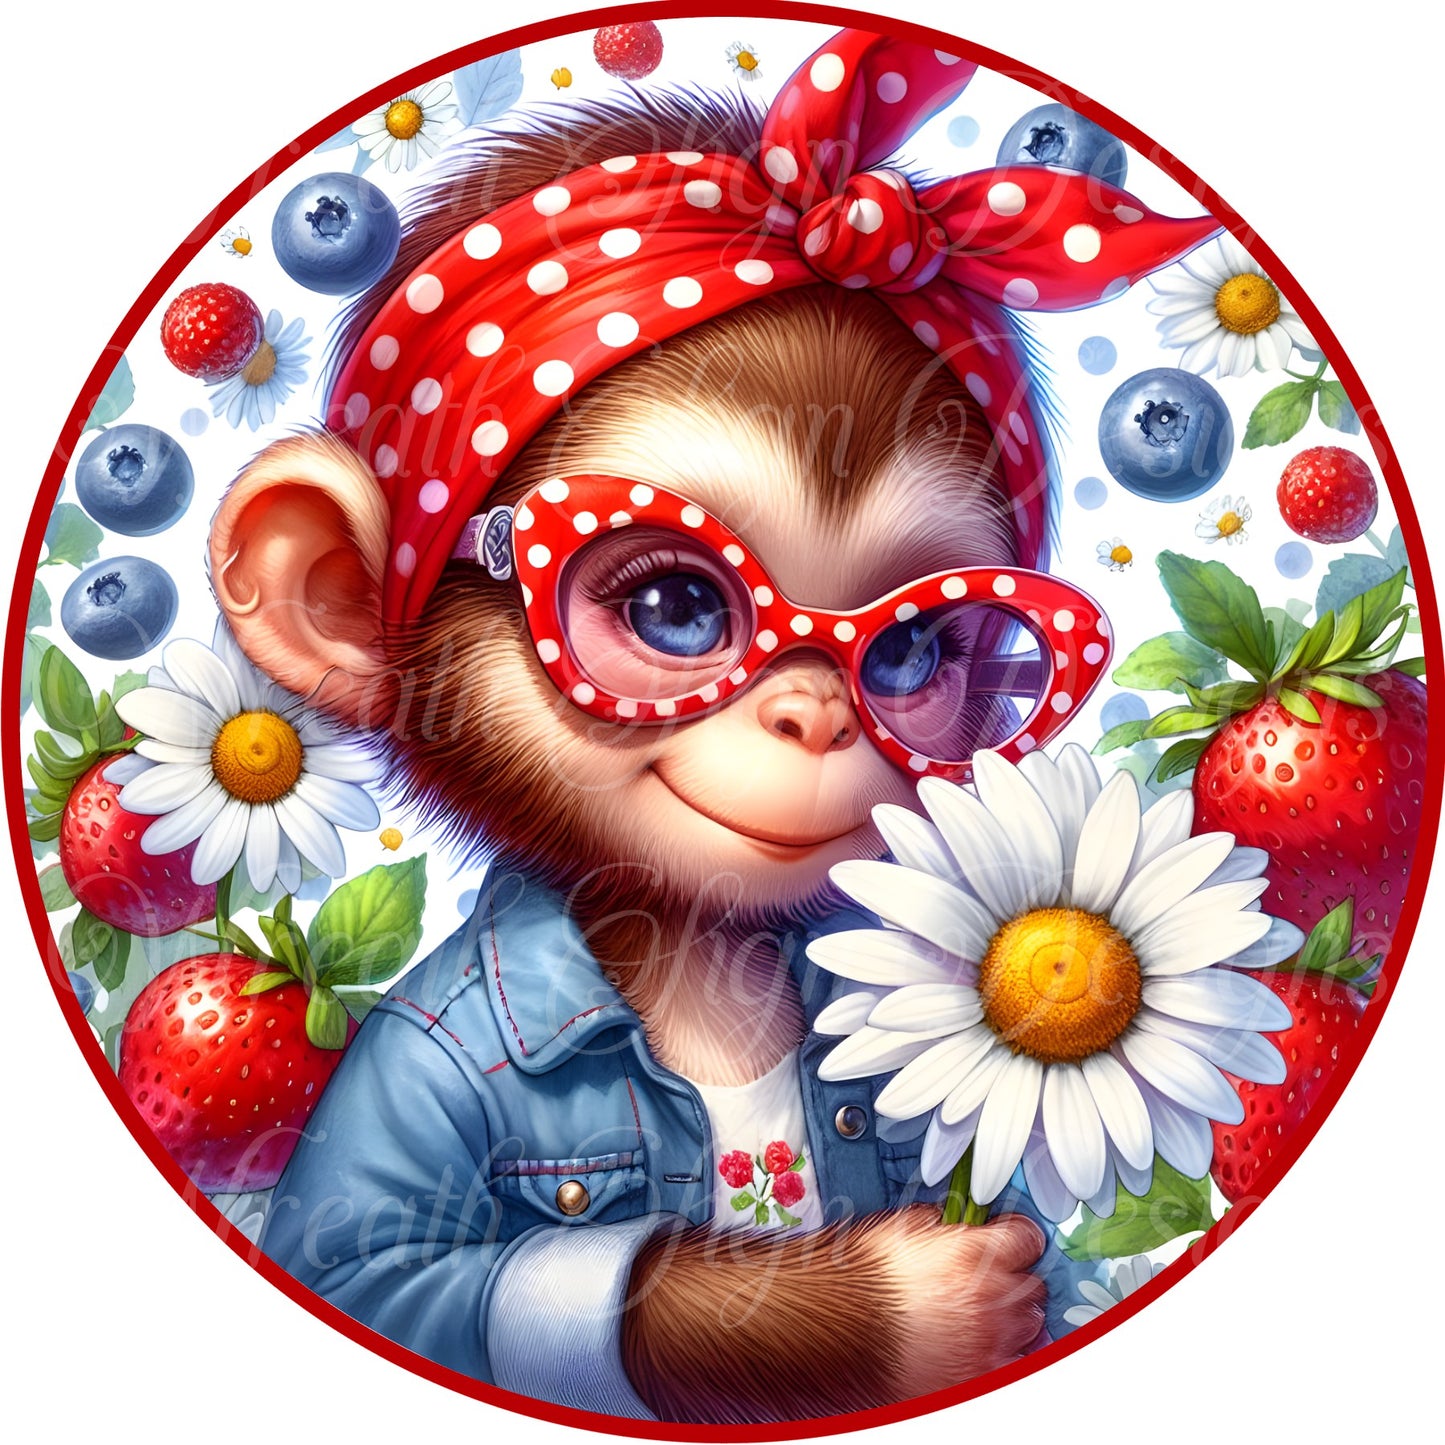 Monkey business, Monkey wearing glasses round metal wreath sign, wreath center, attachment, strawberry blueberry monkey springtime sign